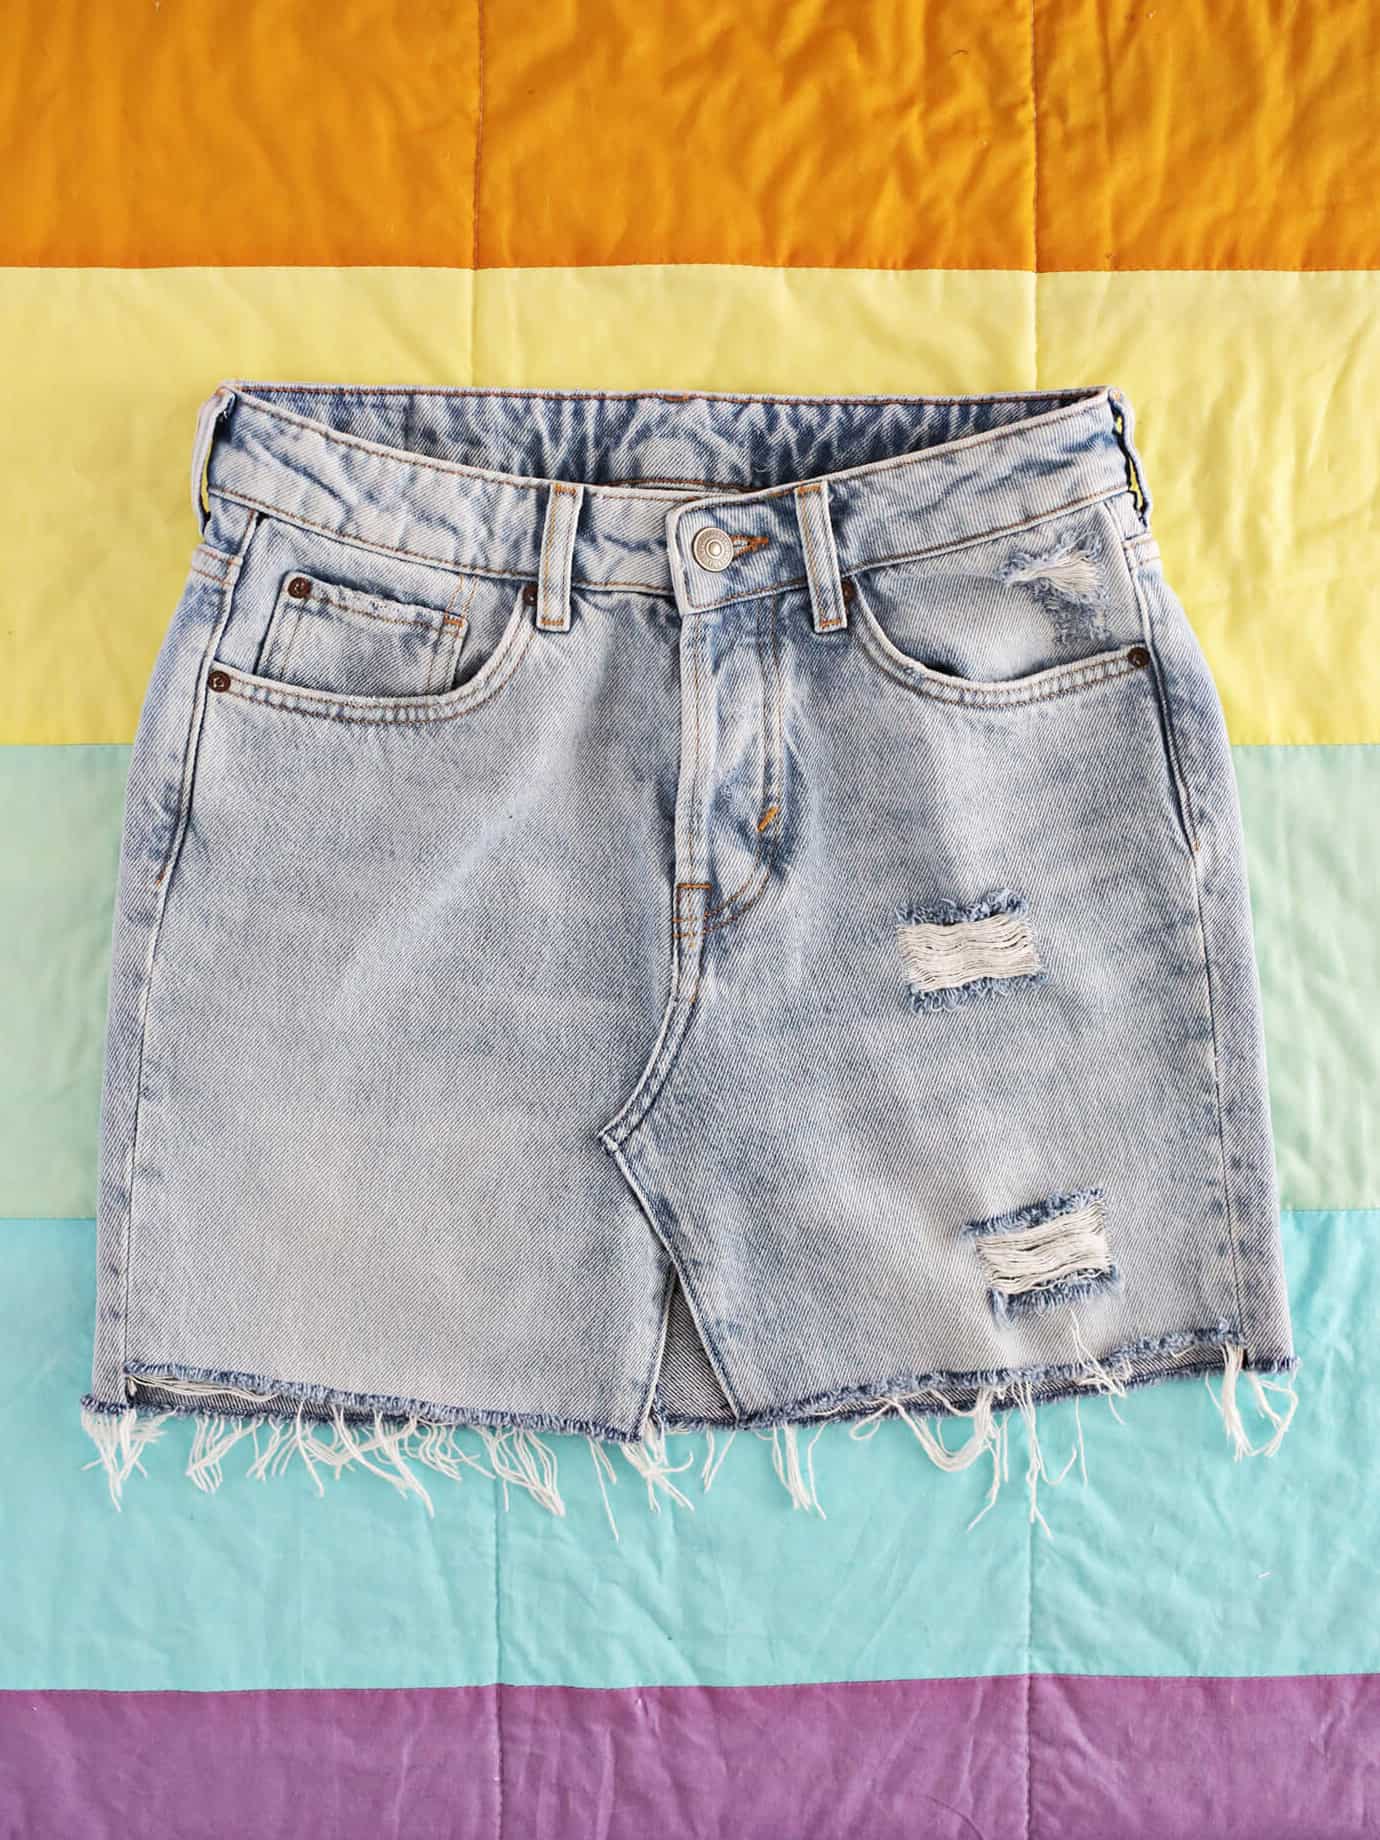 making a jean skirt out of jeans